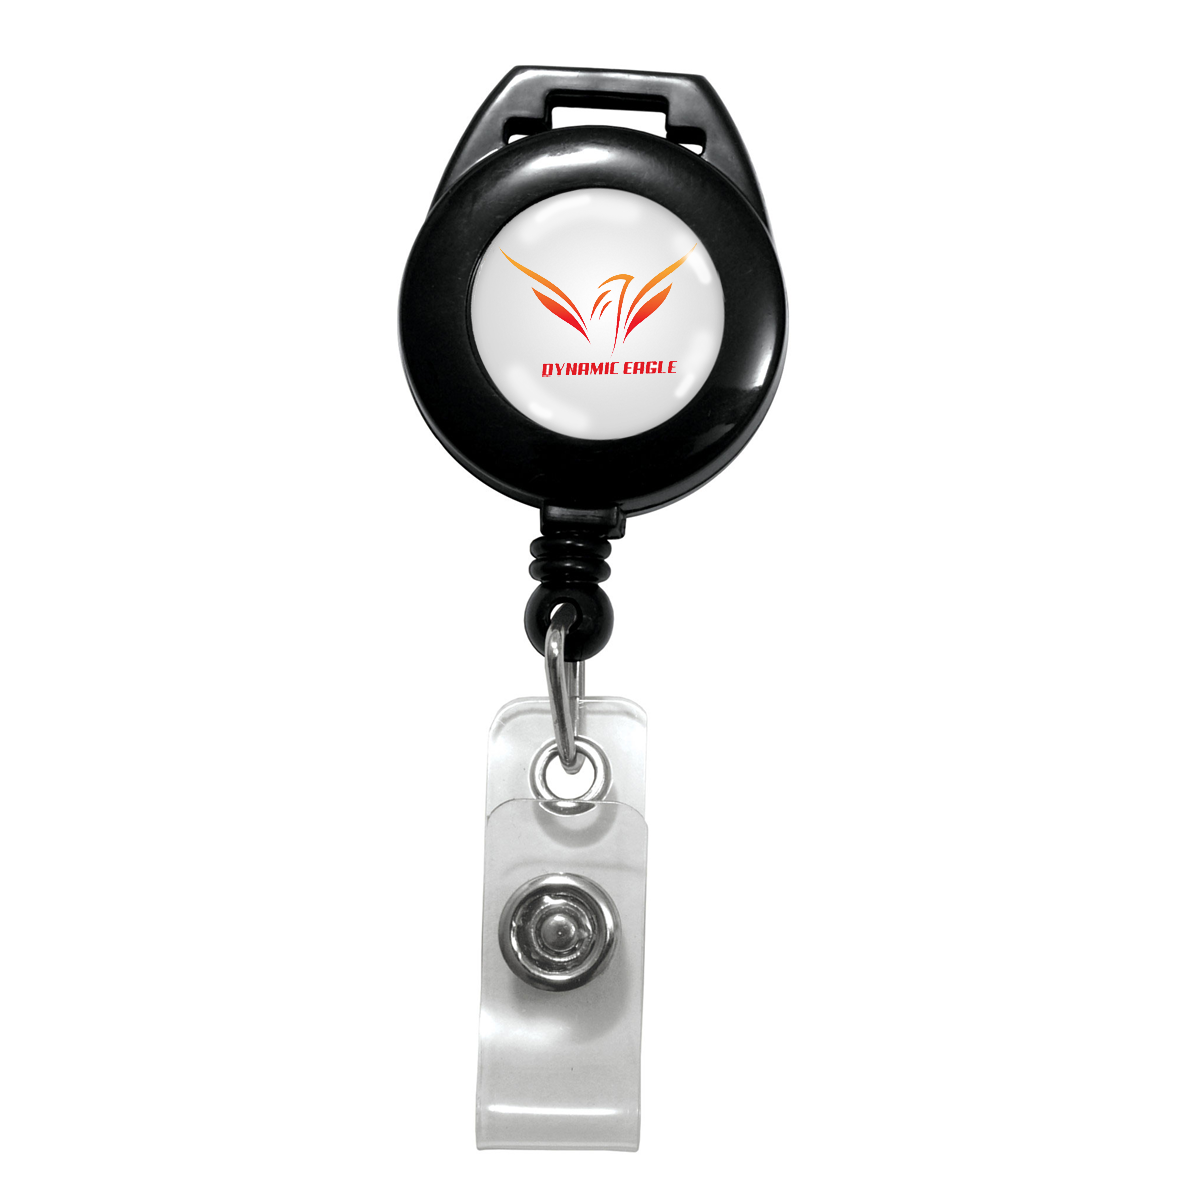 Custom Design Badge Reel That Attaches to Your Lanyard - Add Your Logo